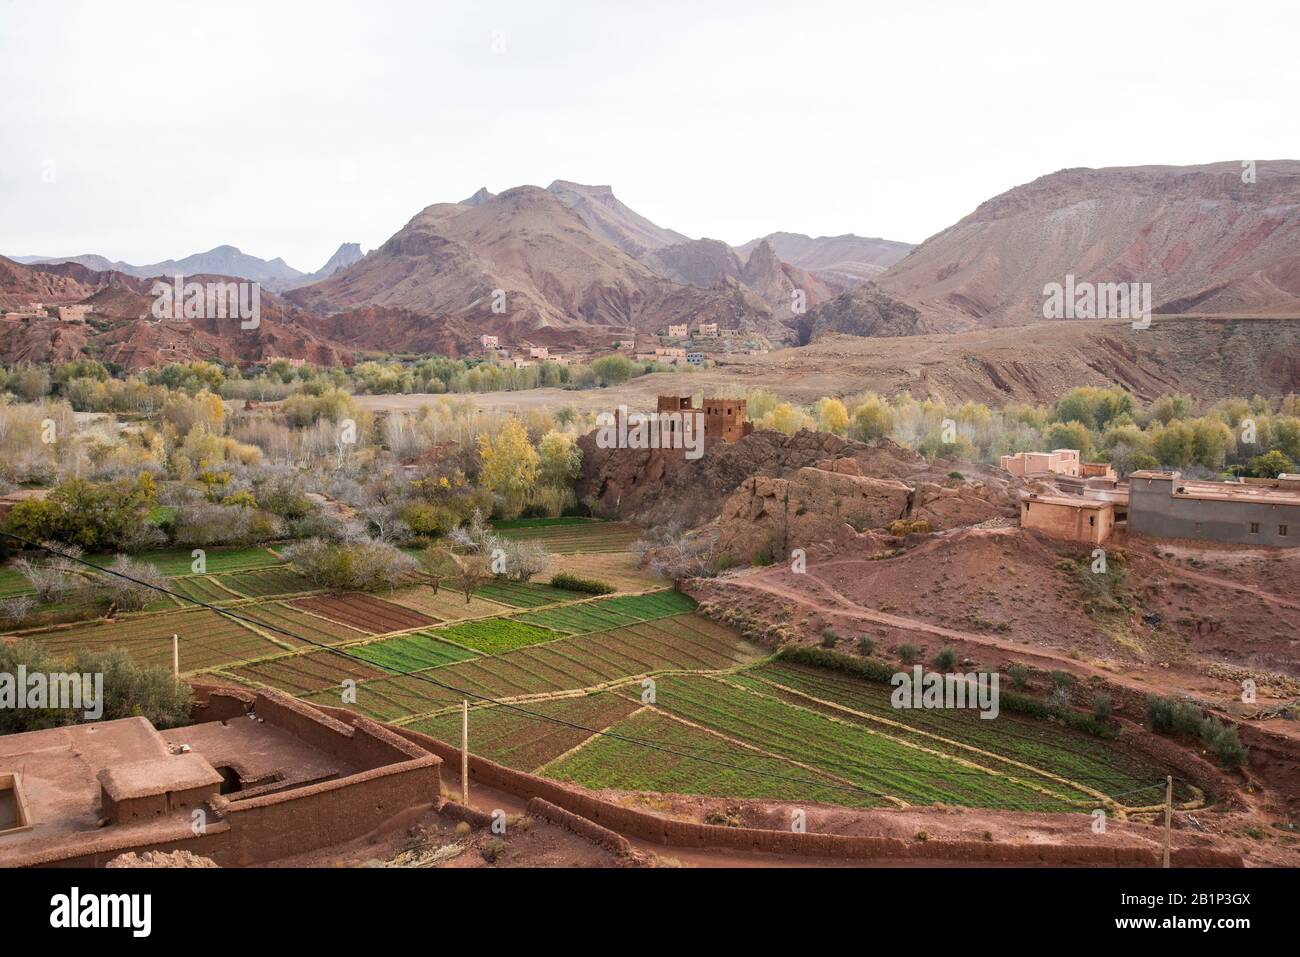 Scenic drive through the Dades Gorge Valley, Morocco Stock Photo